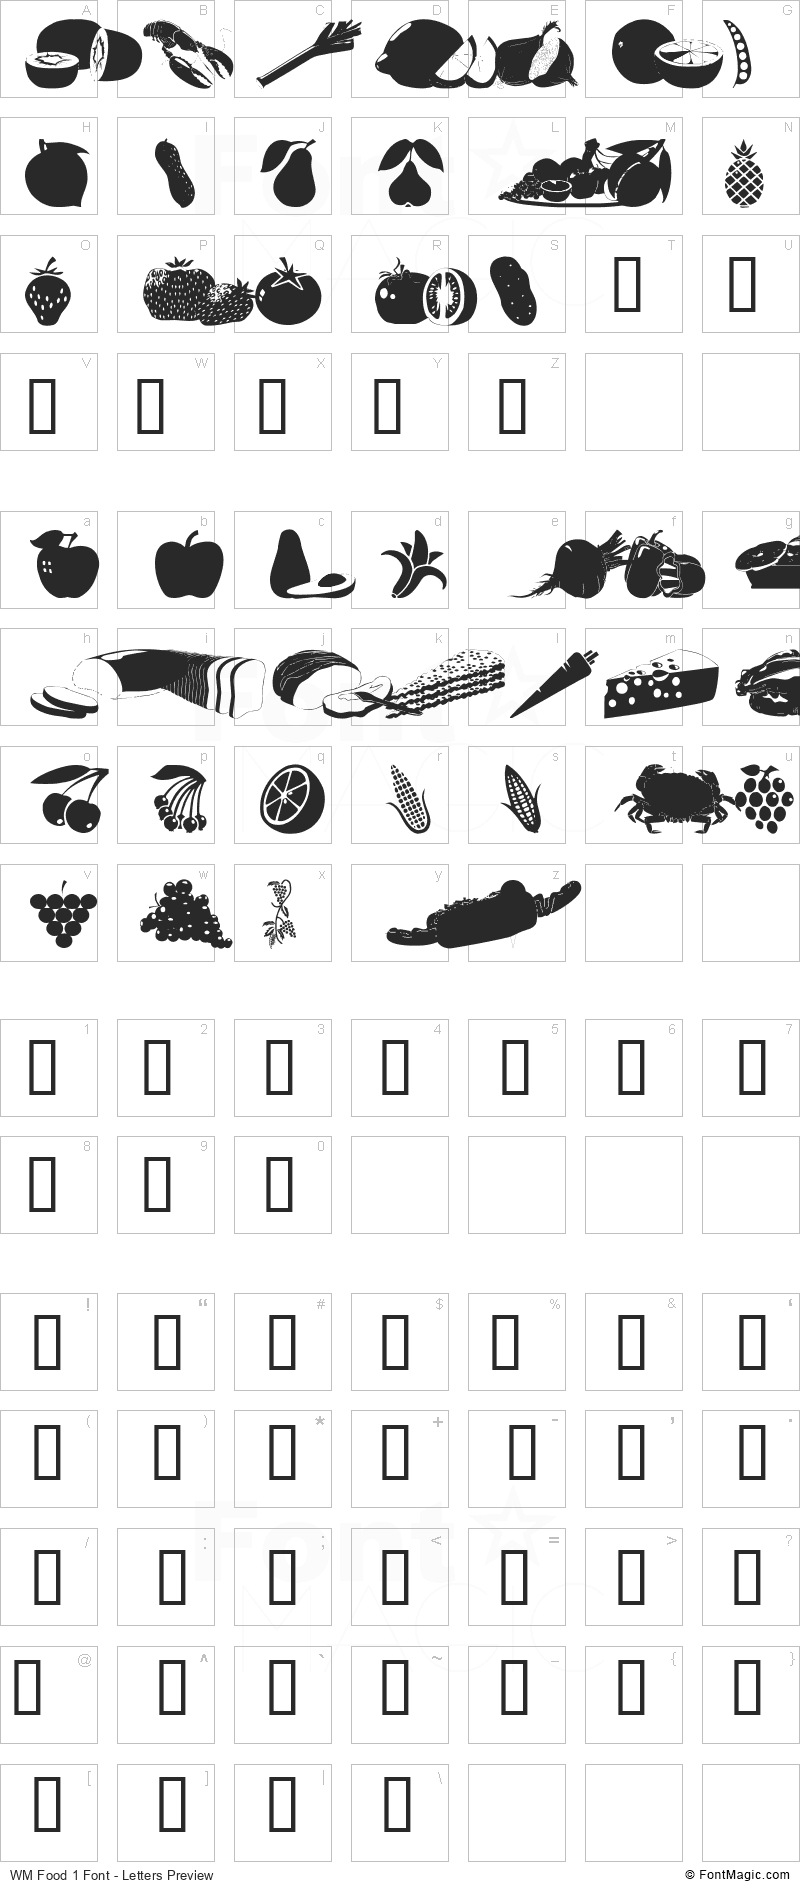 WM Food 1 Font - All Latters Preview Chart